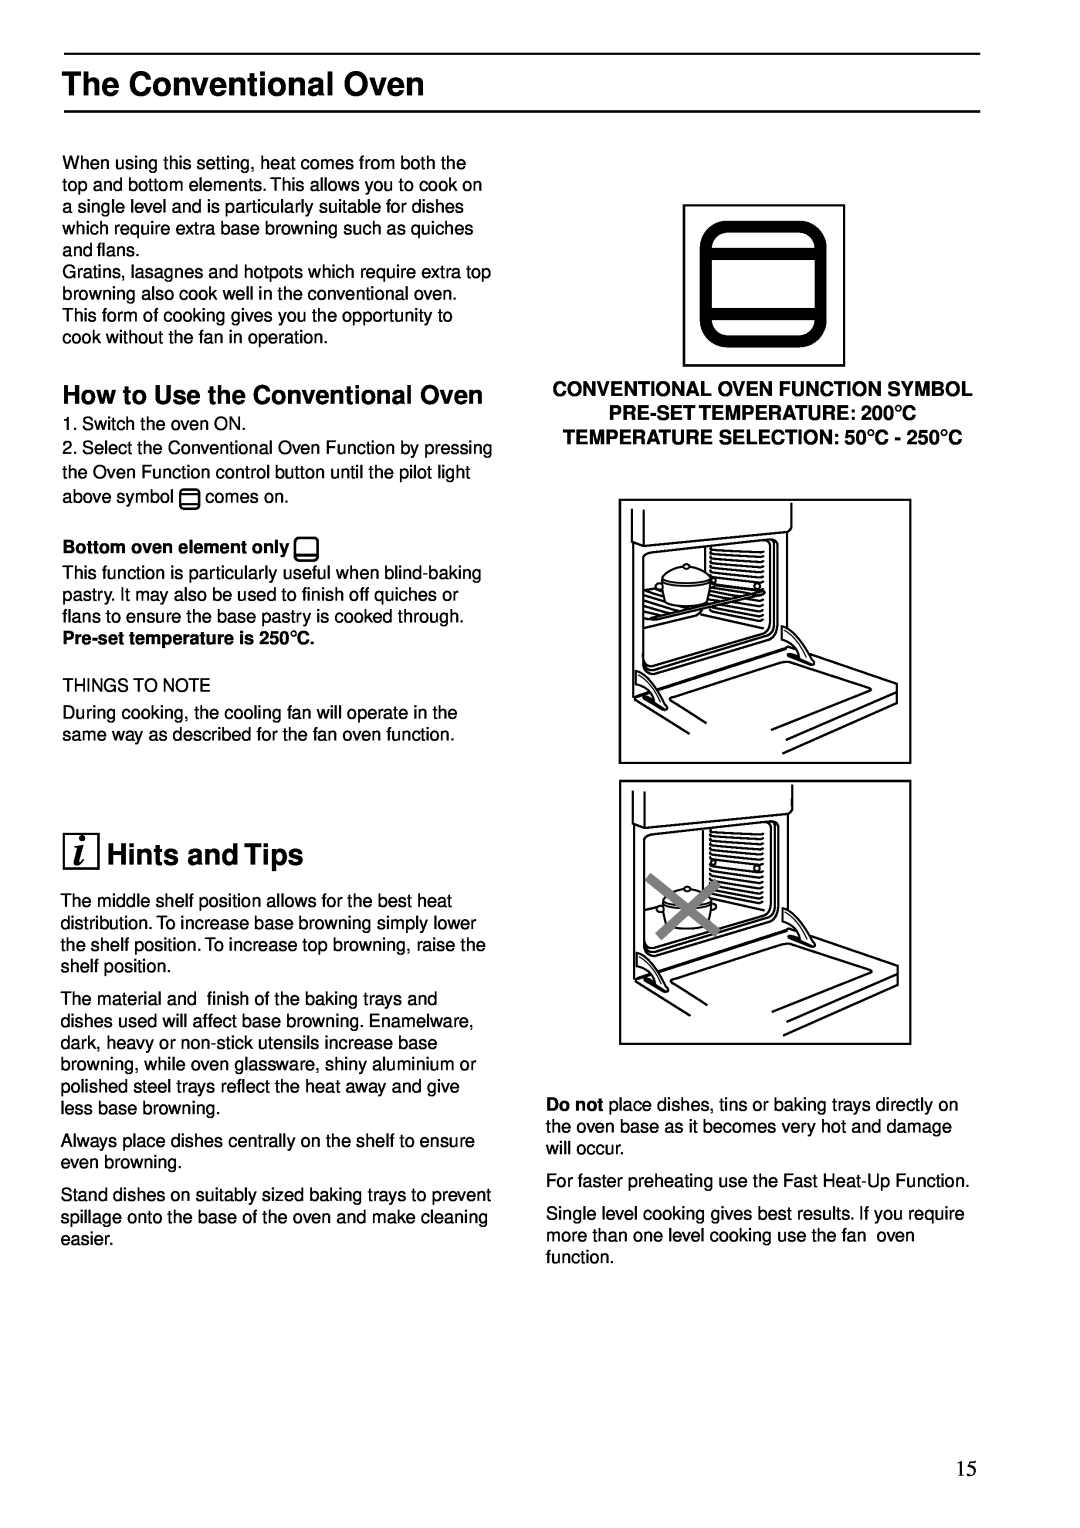 Zanussi ZBS 772 manual The Conventional Oven, i Hints and Tips, How to Use the Conventional Oven, Bottom oven element only 